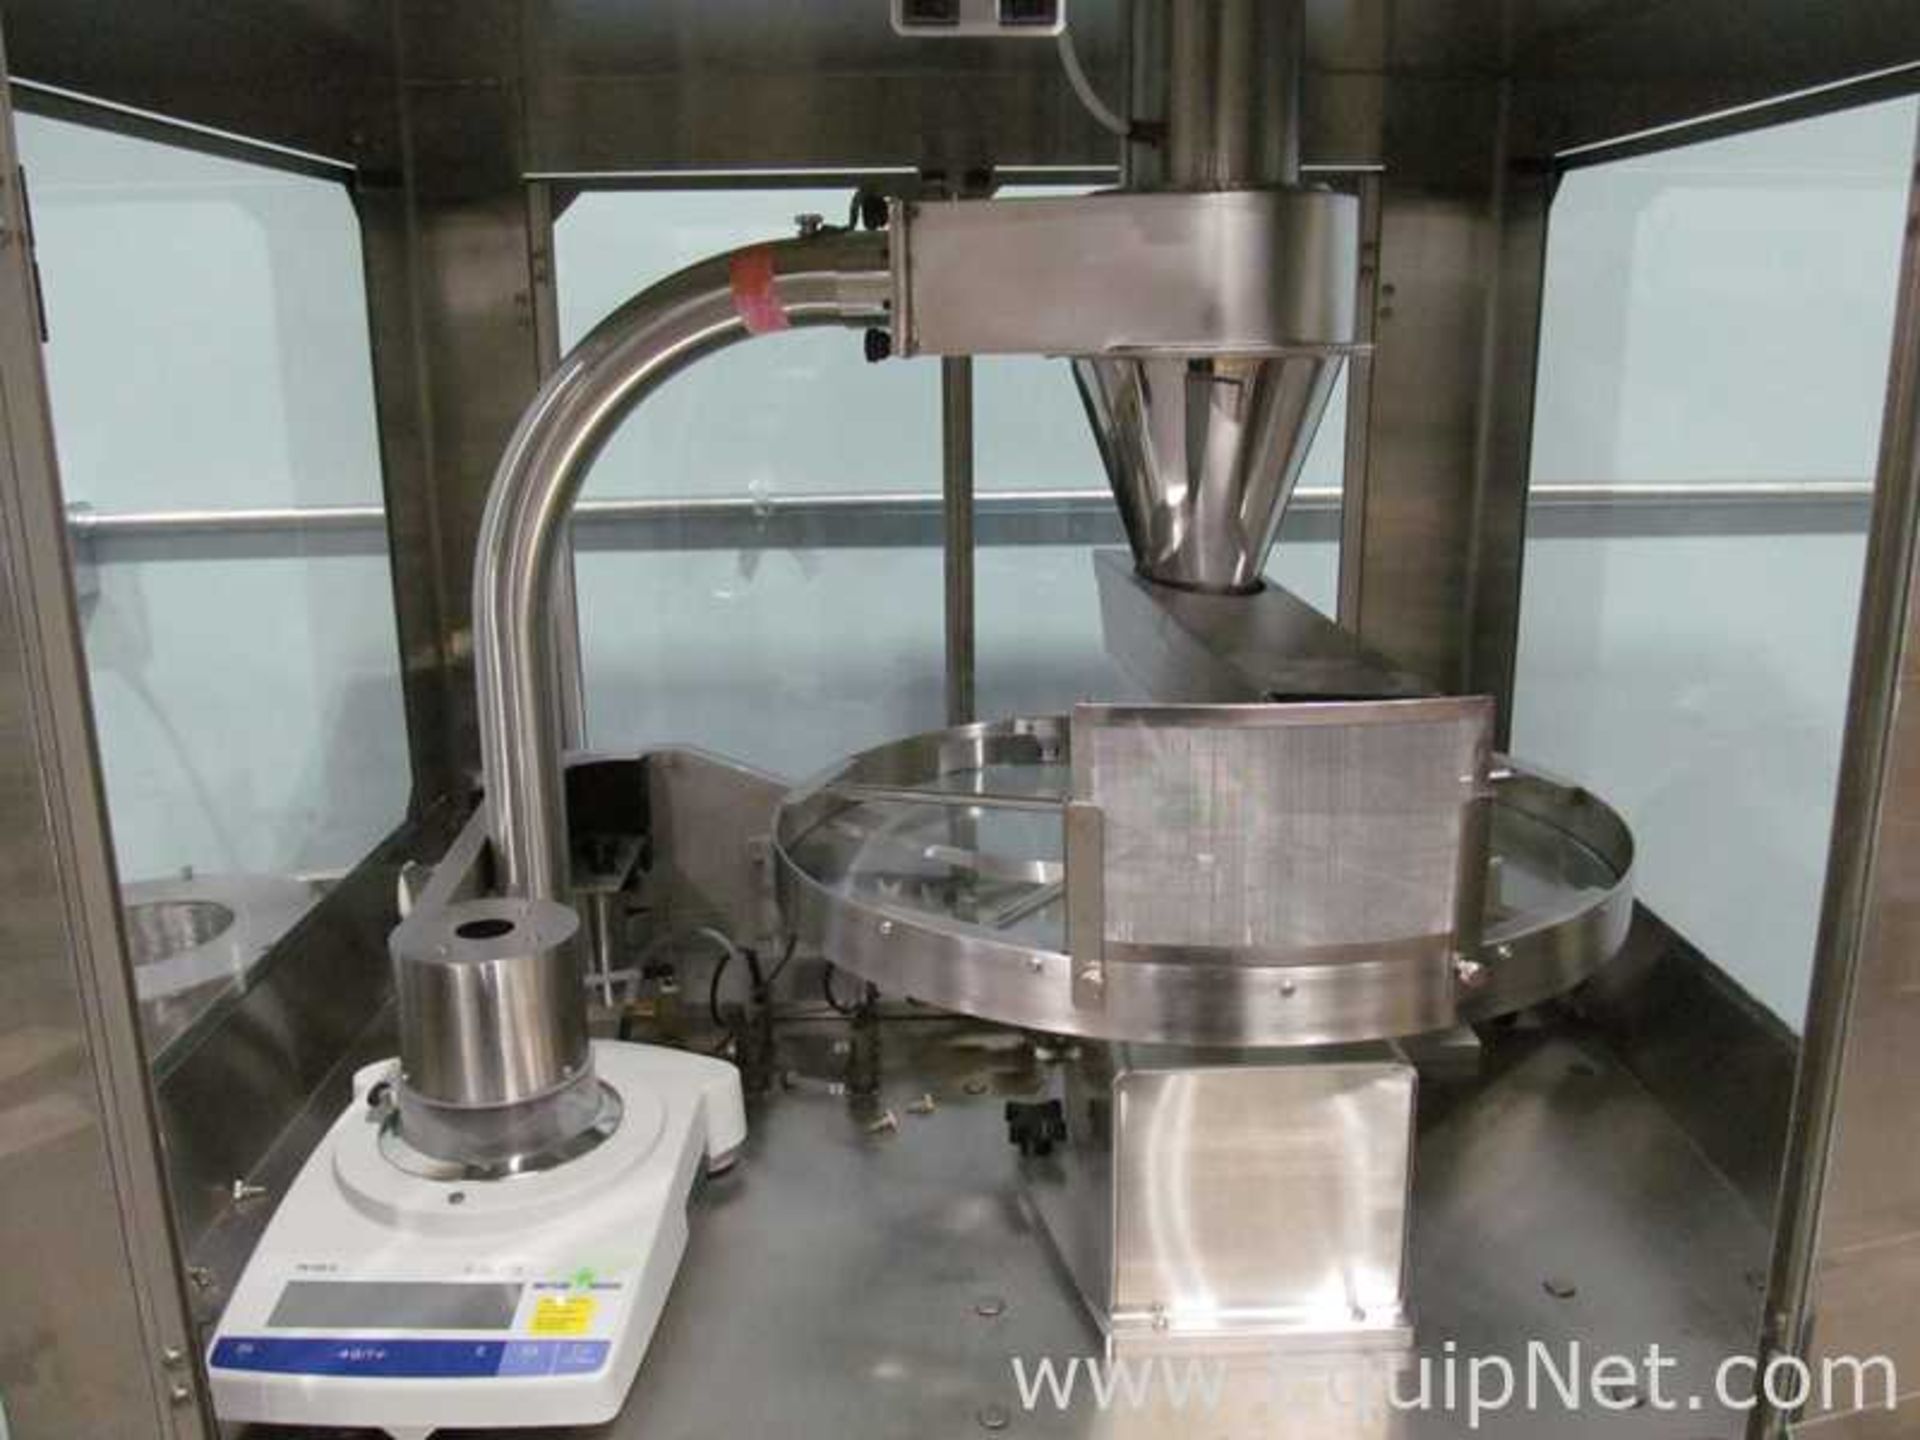 Mocon Vericap 4000 High Speed Capsule Weighing And Sorting System For Research And Development - Image 14 of 27